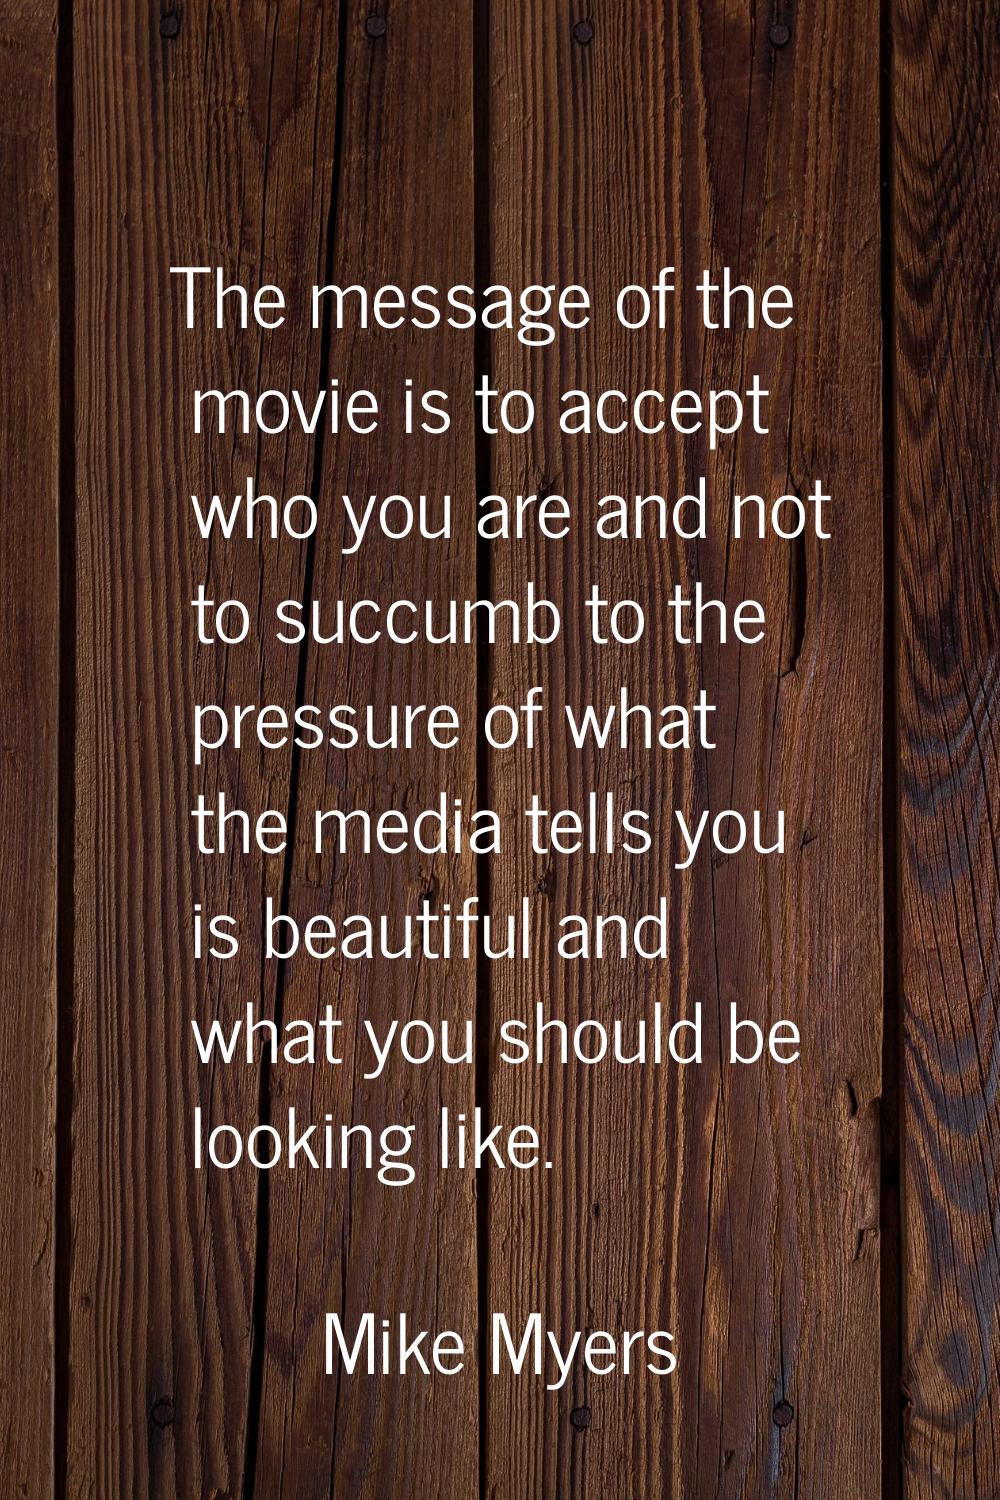 The message of the movie is to accept who you are and not to succumb to the pressure of what the me